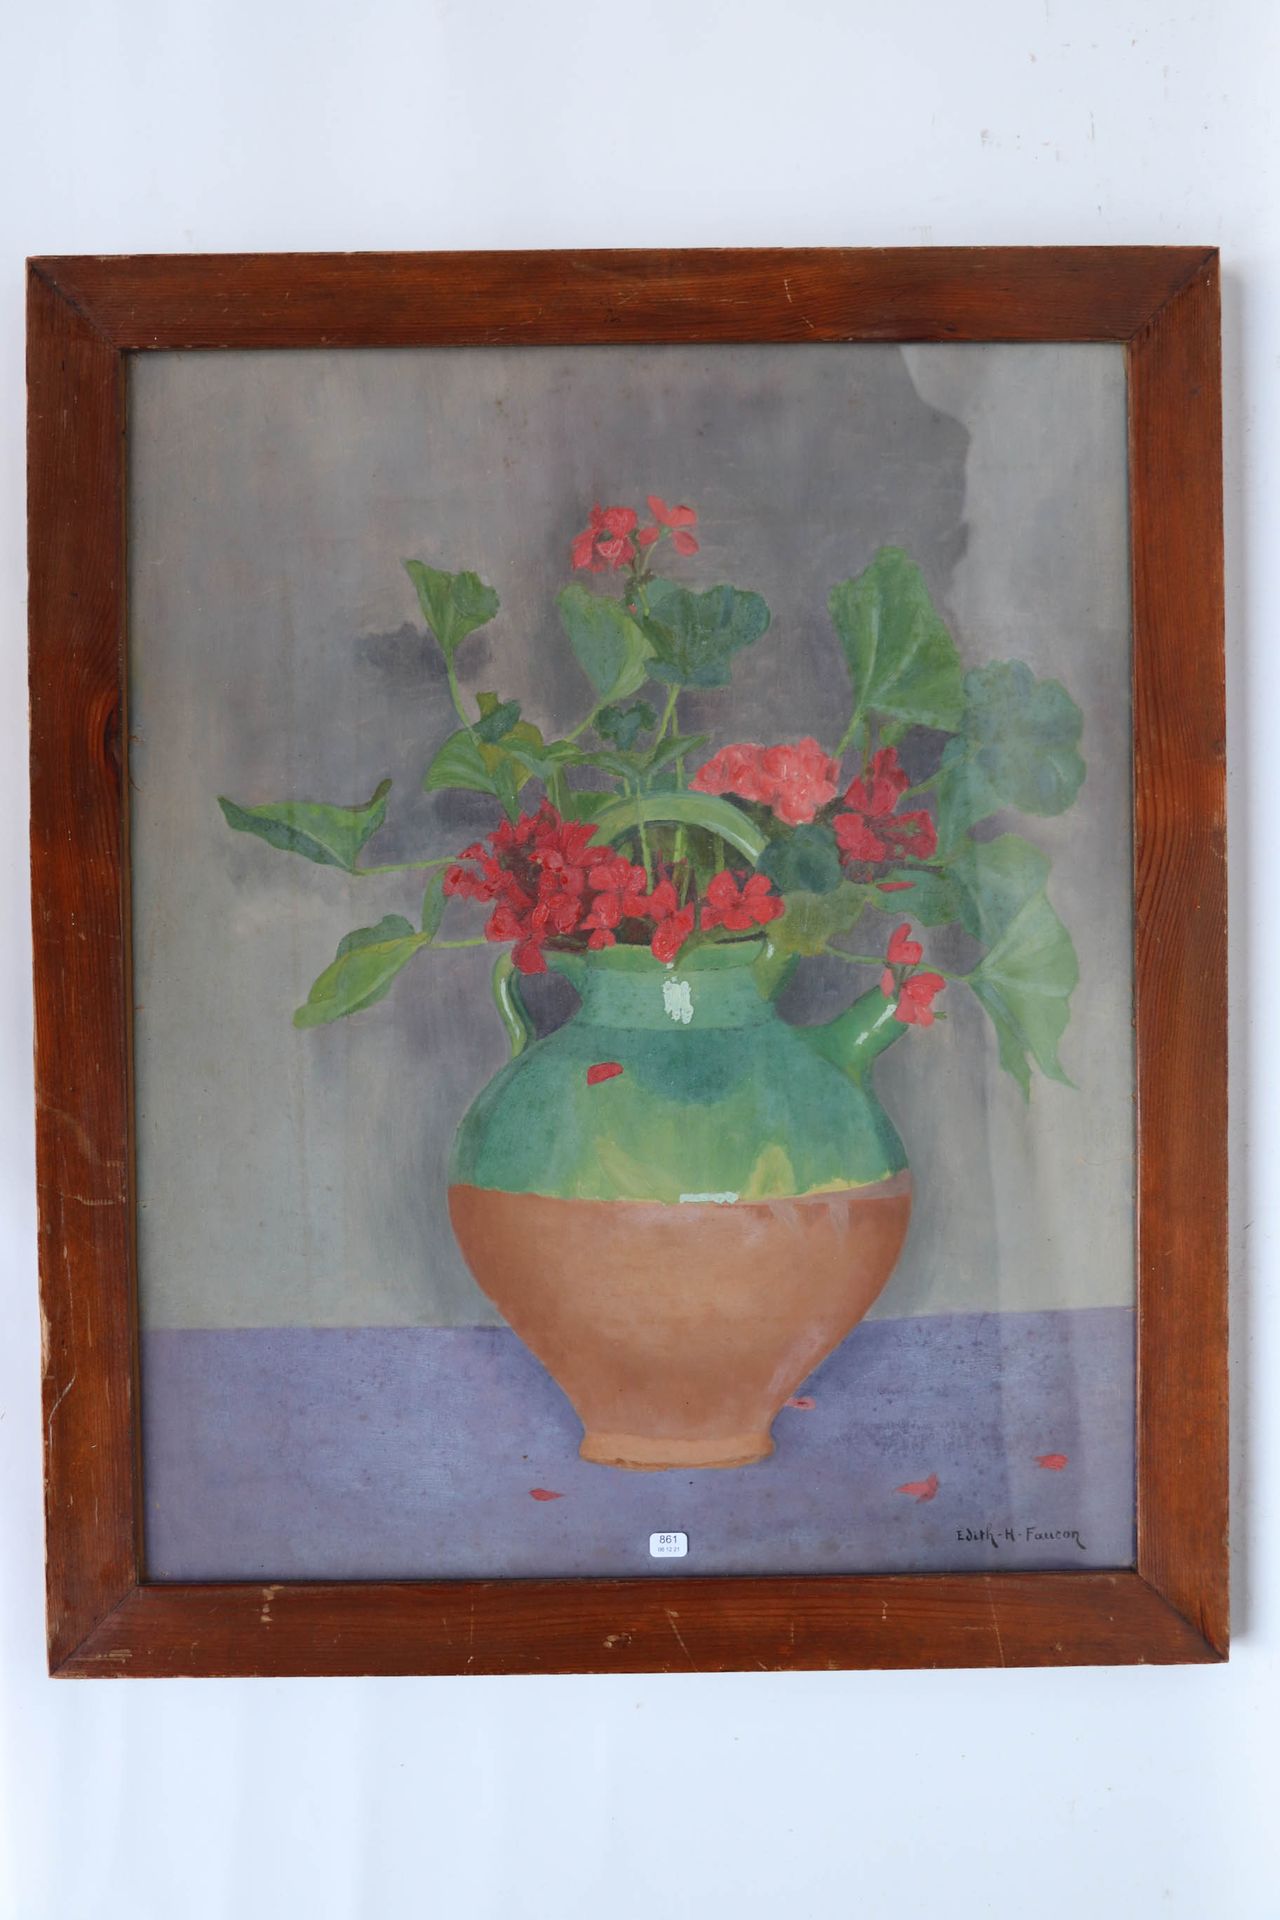 Null FAUCON Edith (born in 1919). "Flowers of geranium in an earthenware and gre&hellip;